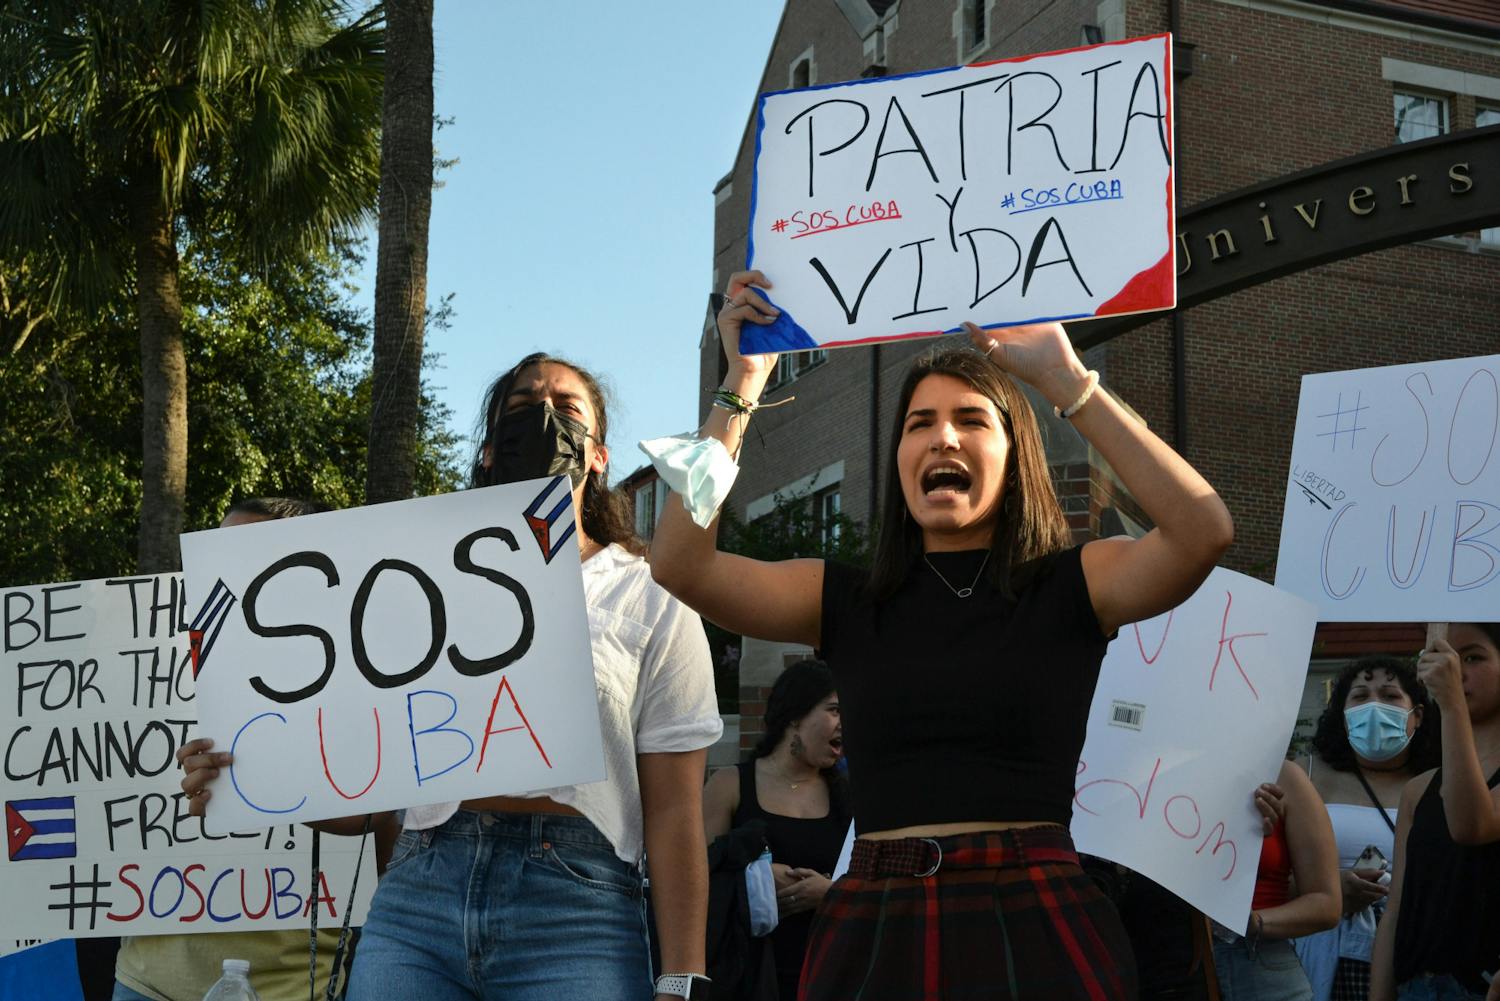 Marian Hernandez, 21, a psychology senior, (right), and Jenna Hidalgo, 21, a criminology and psychology senior, (left), shout “Patria y Vida” as they raise signs embellished with colors of the Cuban flag on Friday, July 16, 2021. UF students gathered at the corner of University Avenue and 13th street to protest human rights abuses in Cuba.